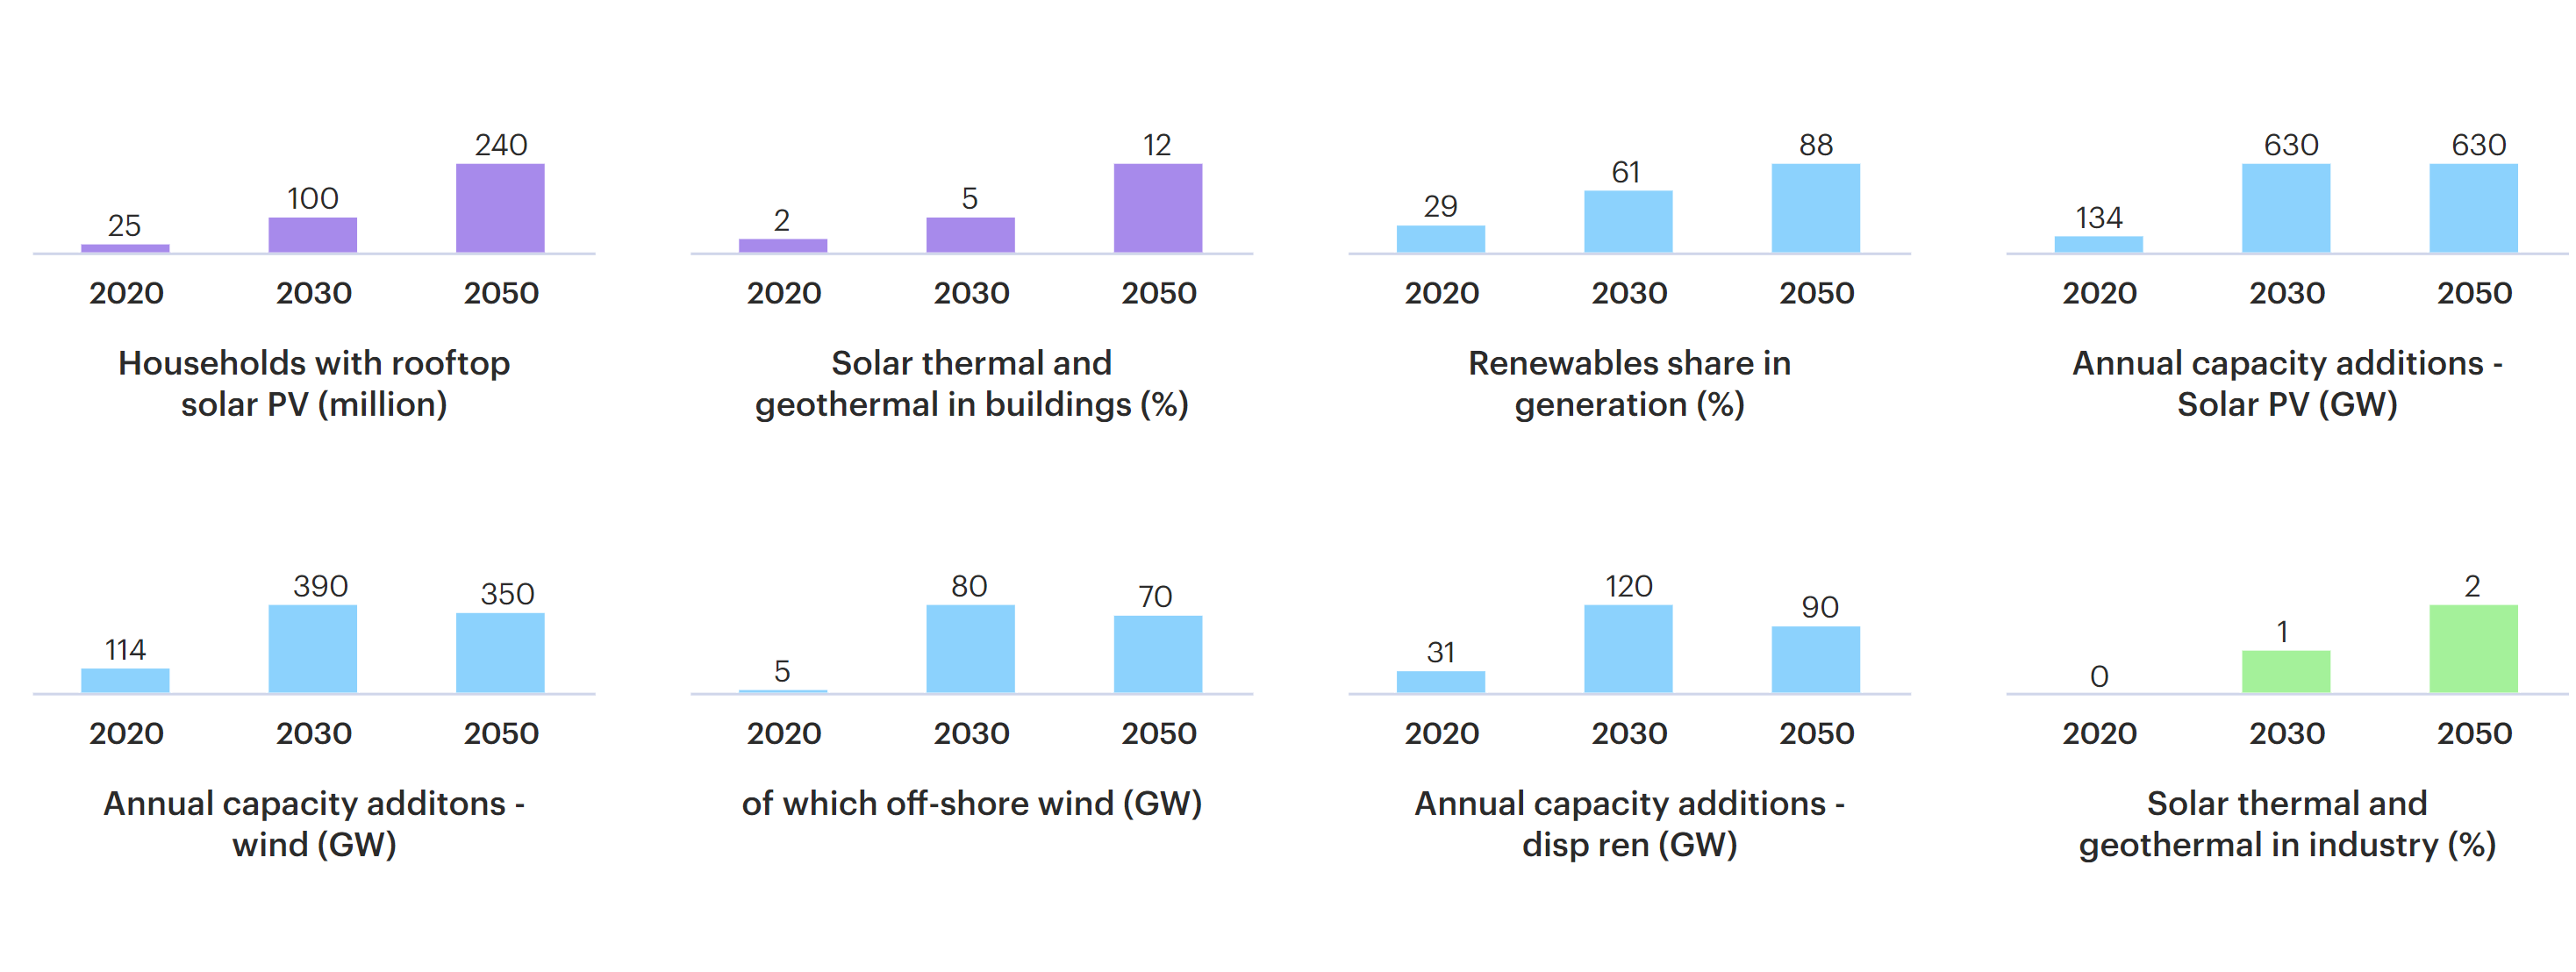 These graphs show the projected growth in various segments of renewable energy, including offshore wind, from 2020 to 2030 to 2050